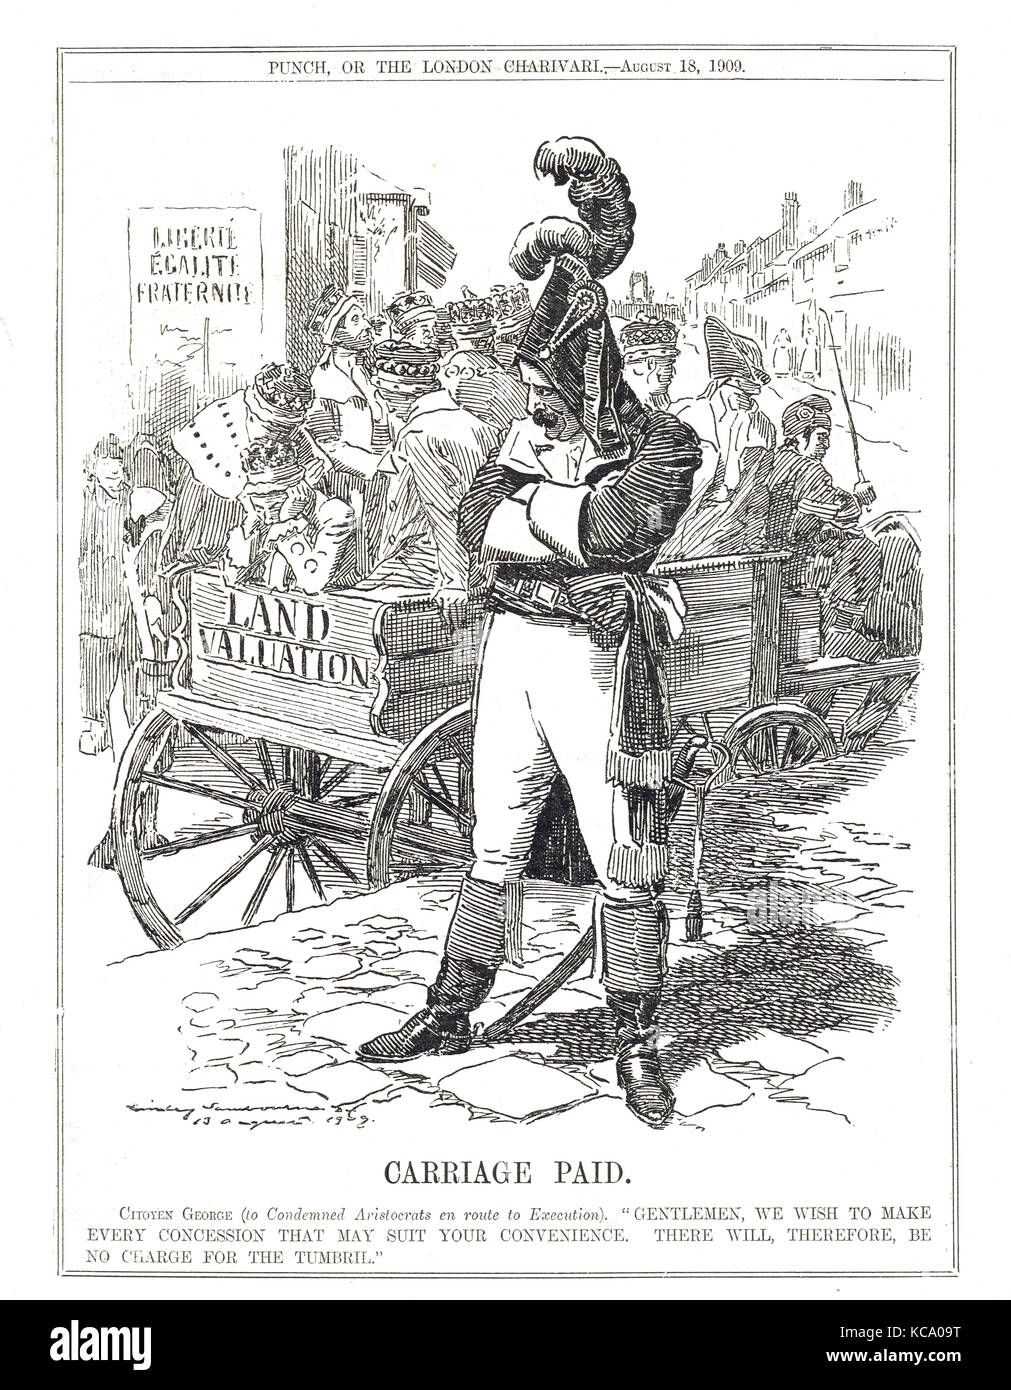 David Lloyd George portrayed as a French revolutionary Citoyen George. Punch cartoon on the People's budget of 1909-10 Stock Photo